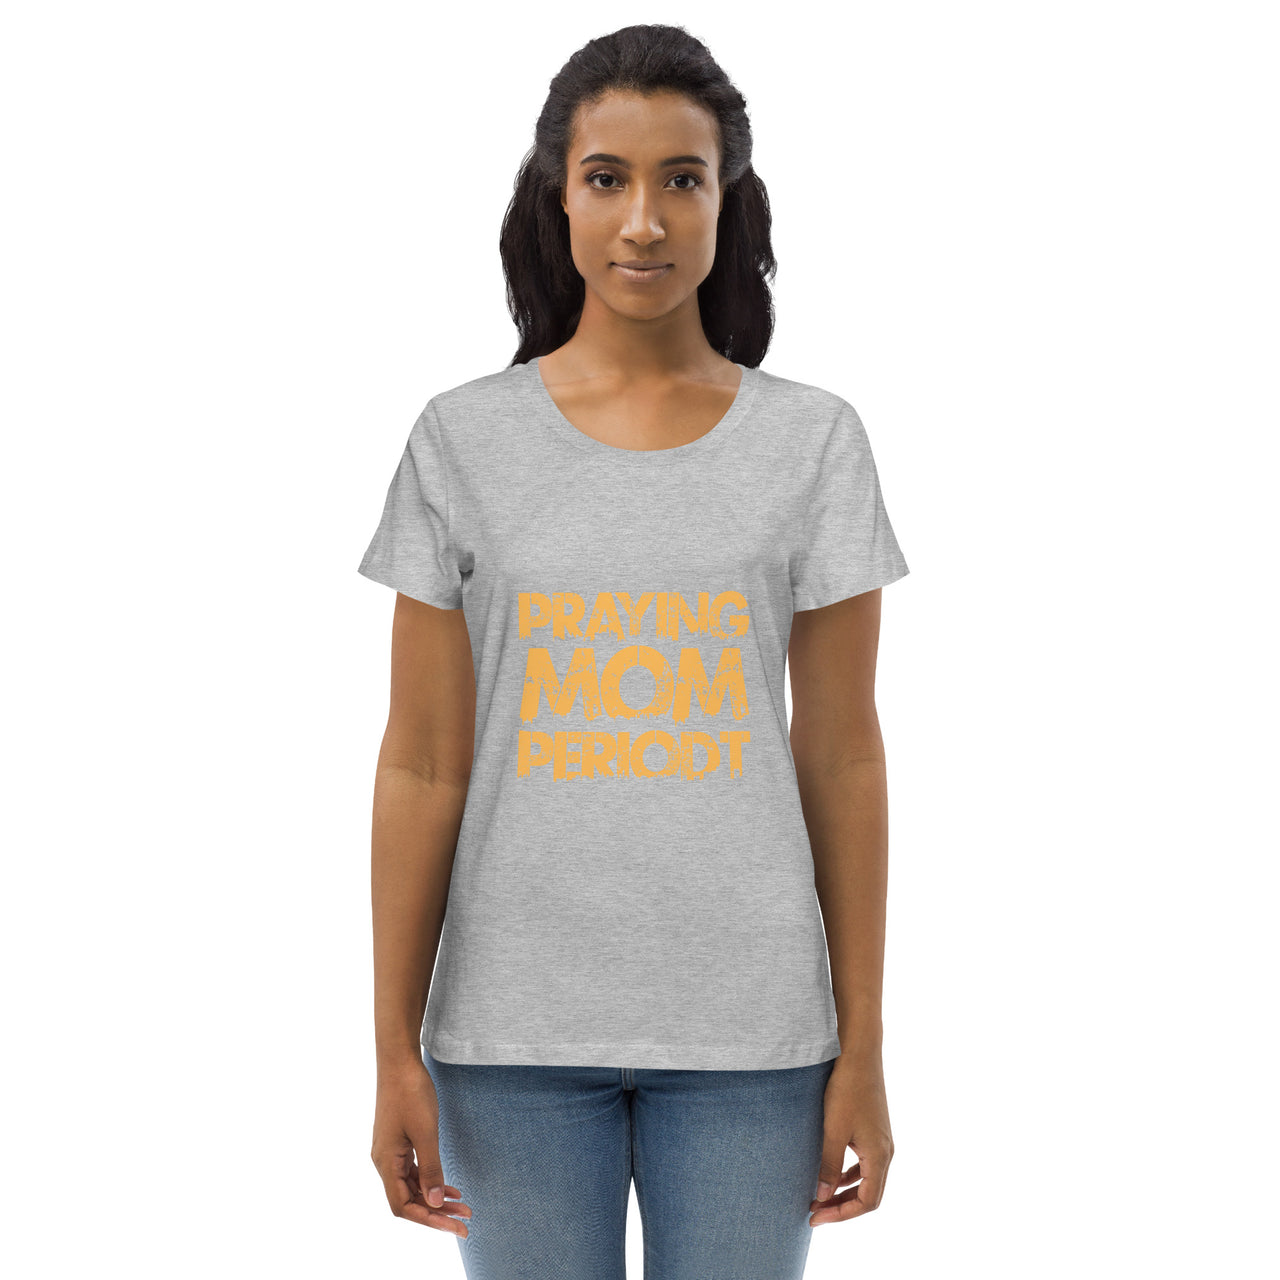 [Praying Mom Periodt] Gold Women's Fitted Eco Tee